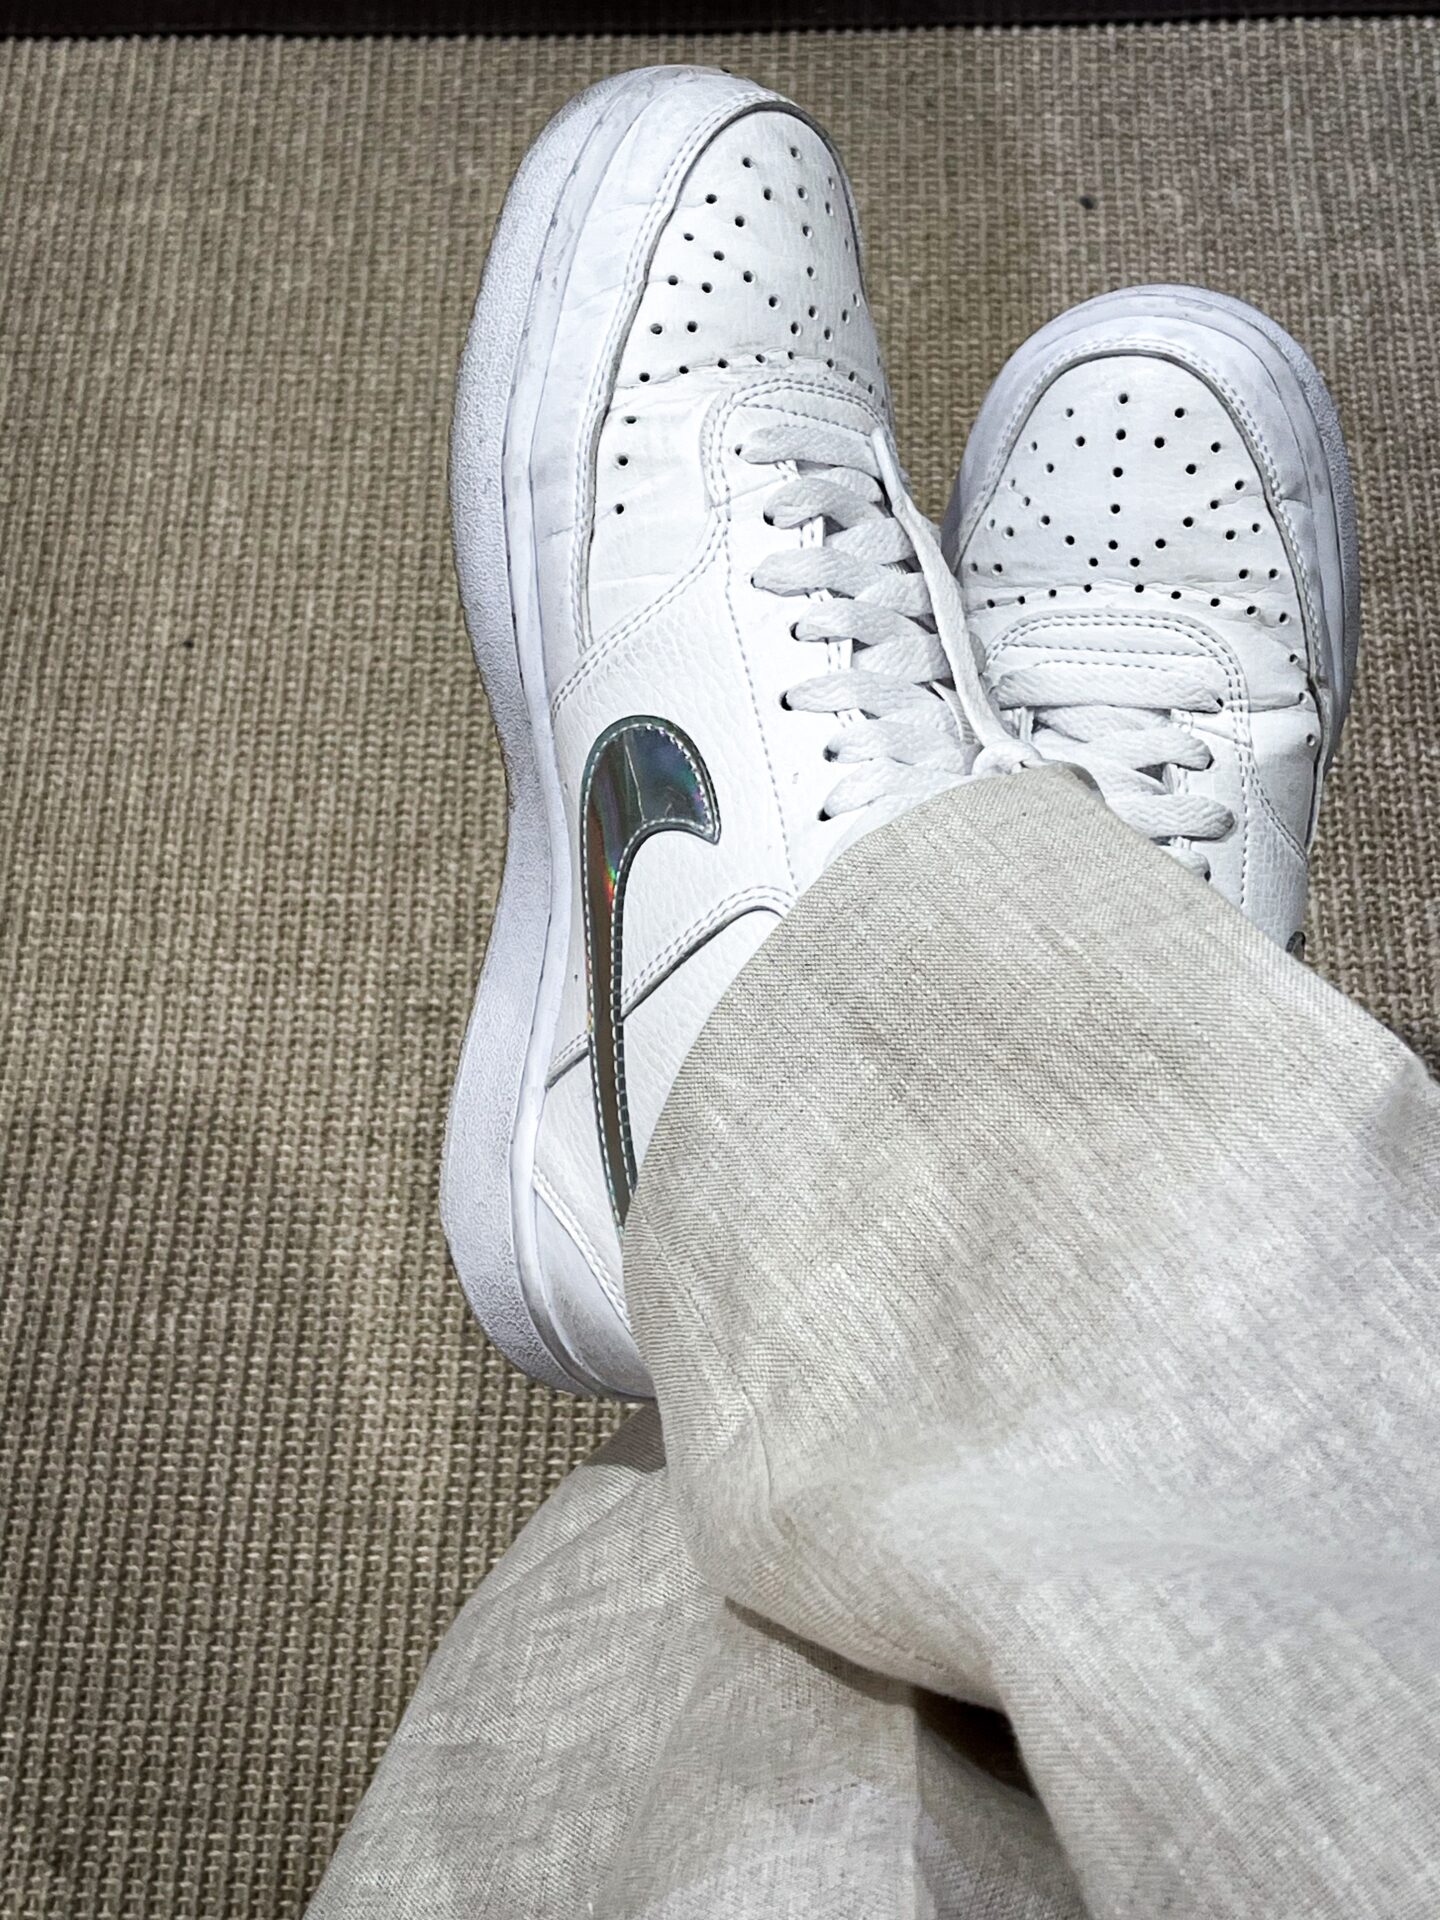 White Nike sneakers with silver swoosh